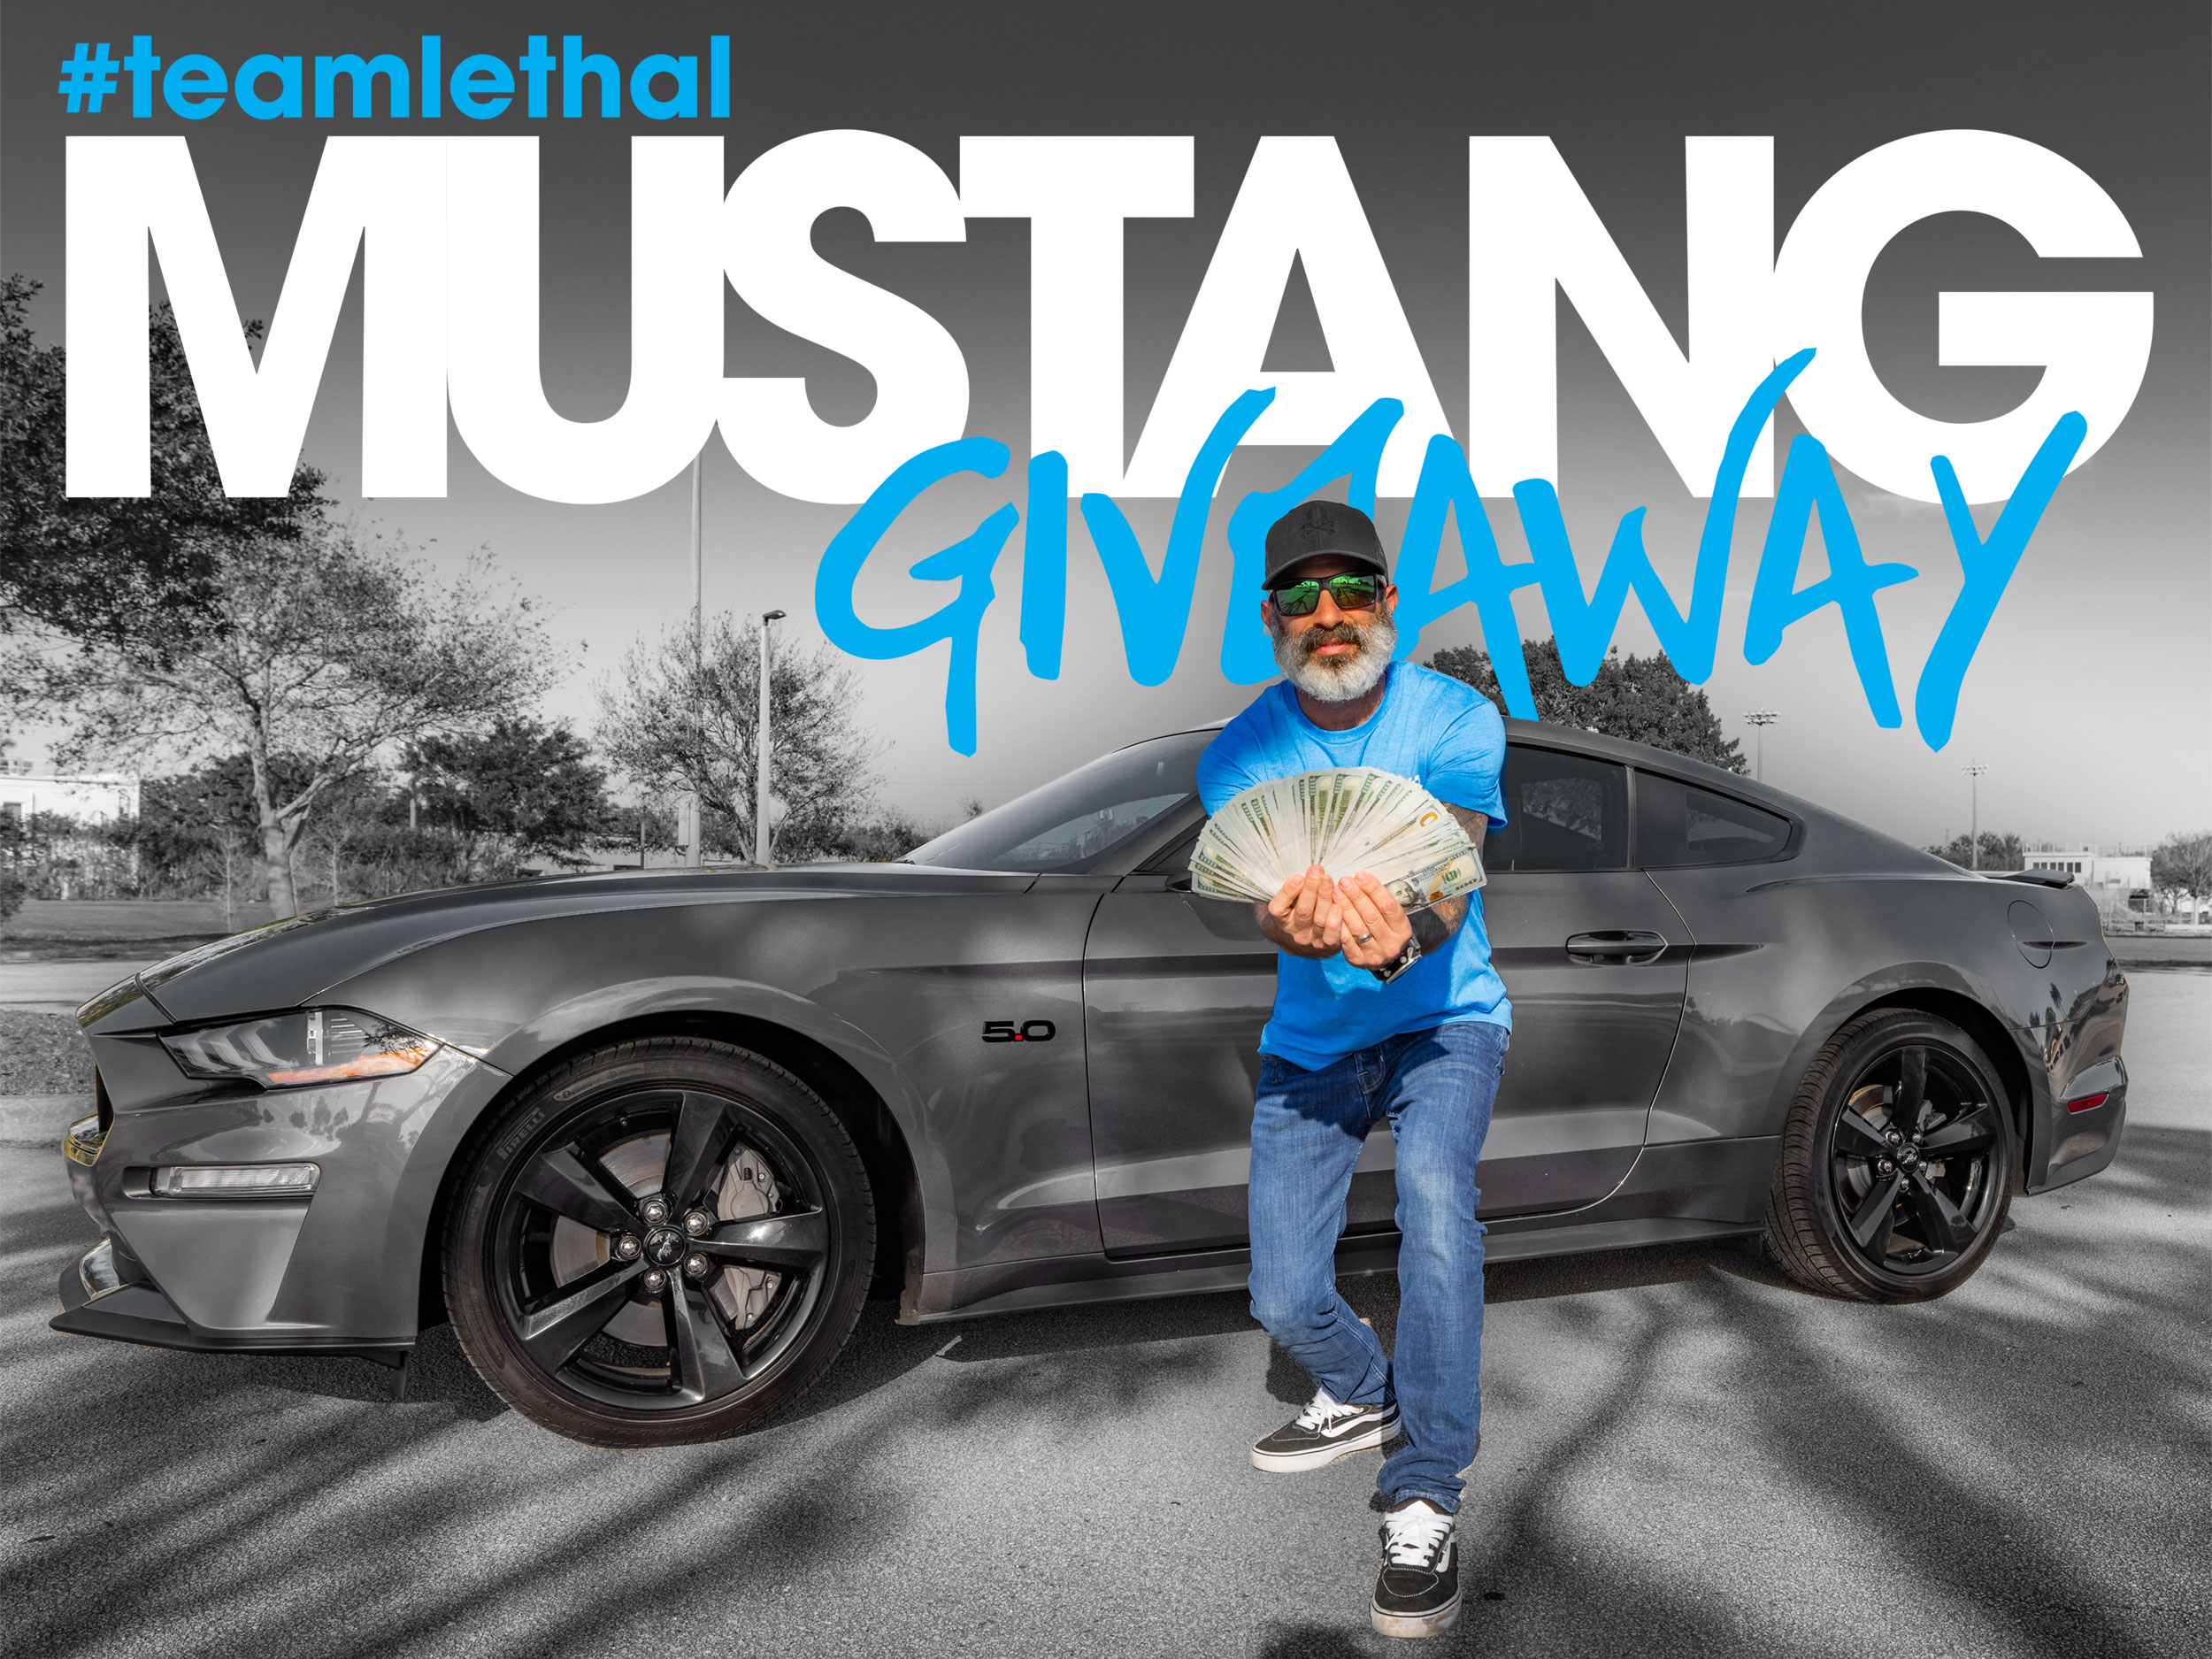 S650 Mustang #TEAMLETHAL MUSTANG GIVEAWAY IS LIVE!!! mustanggiveawayimage